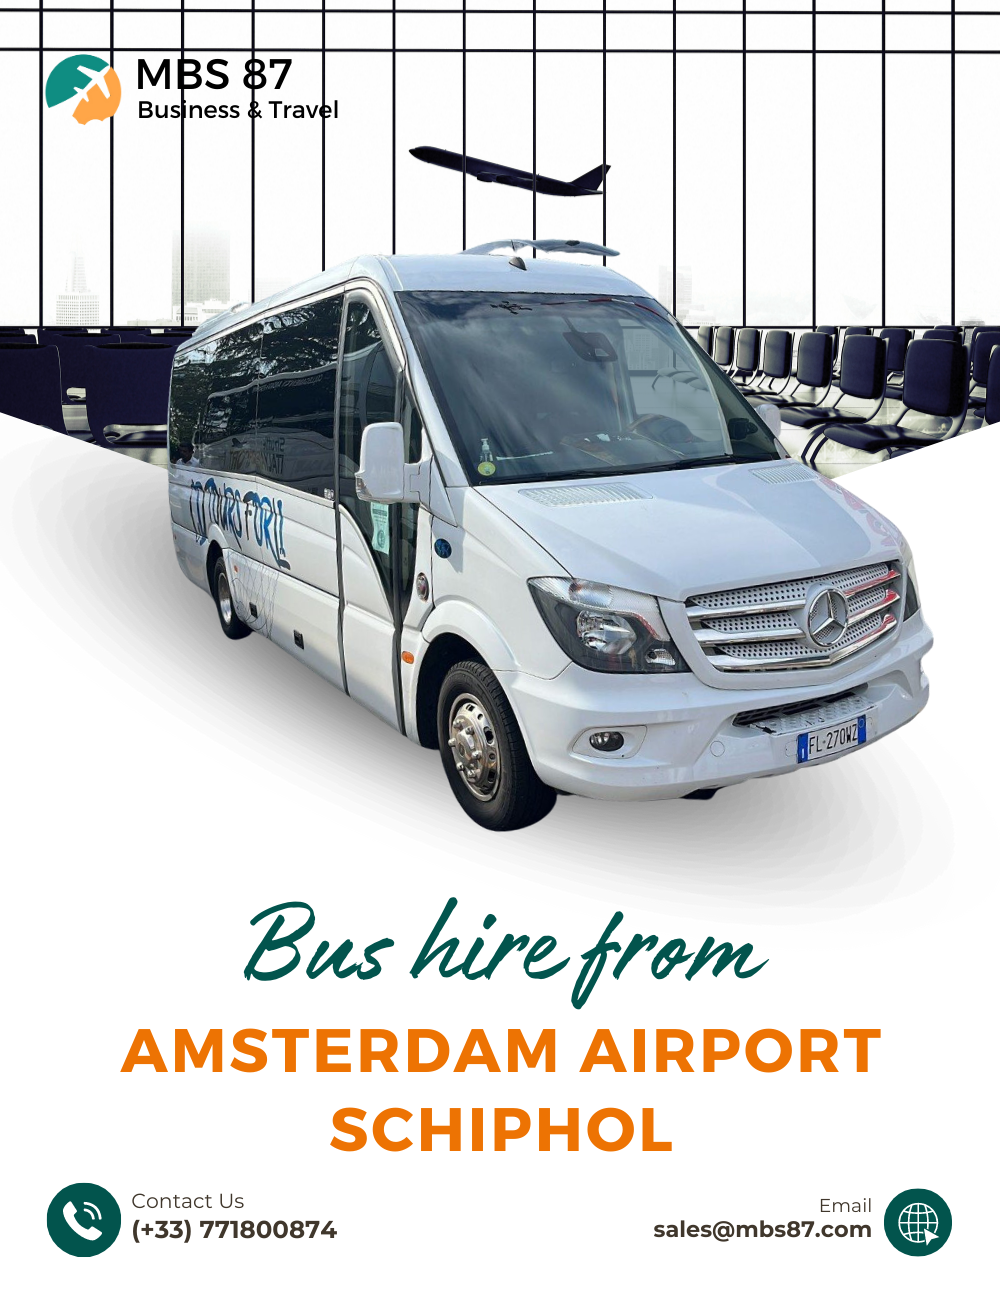 Convenient and Reliable: Why You Should Consider Using an Airport Transfer Service in Amsterdam